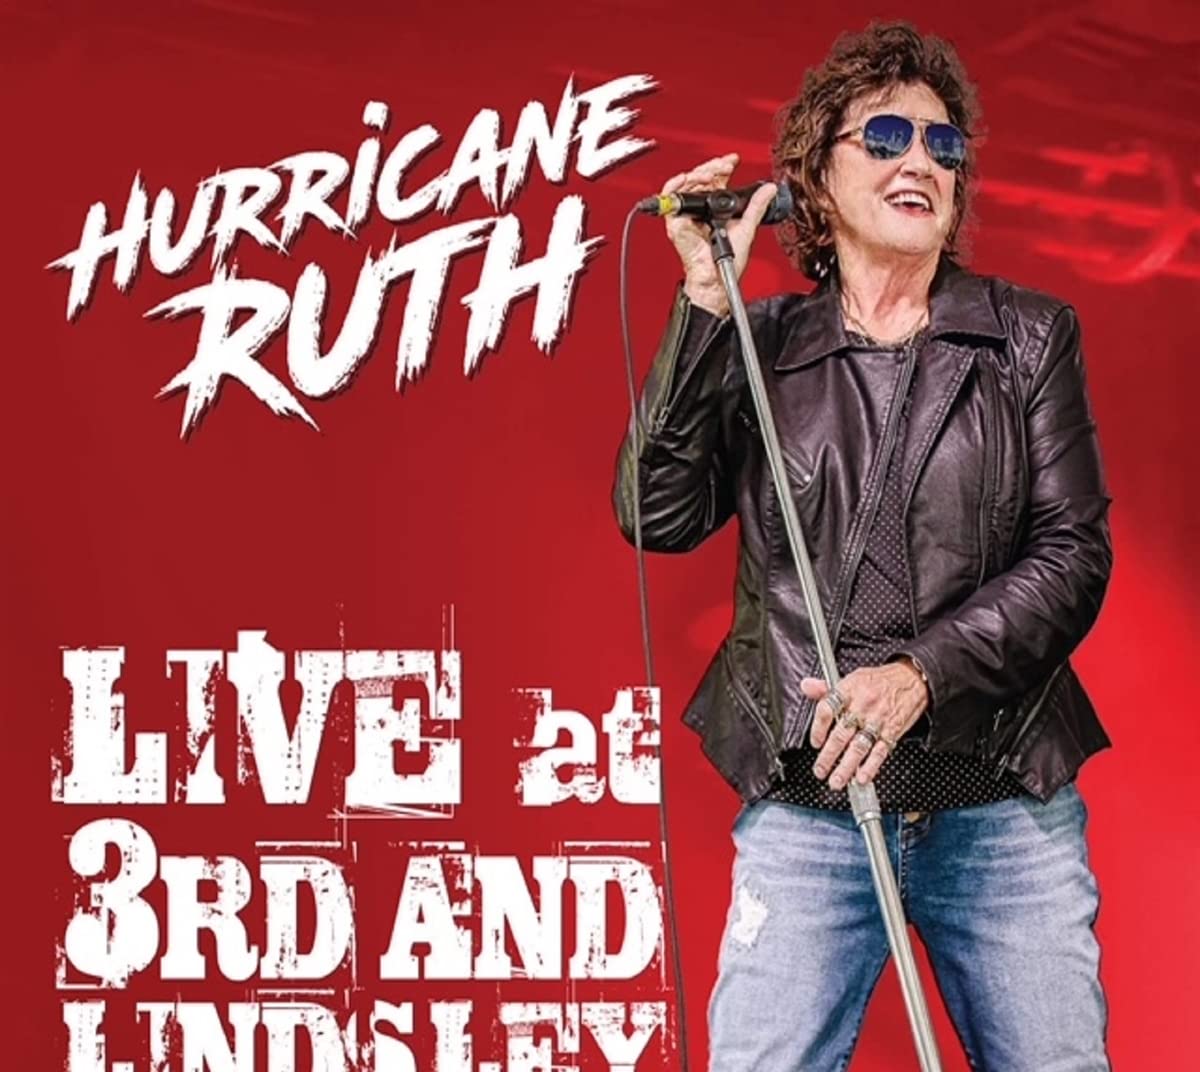 Hurricane Ruth - Live at 3rd And Lindsley